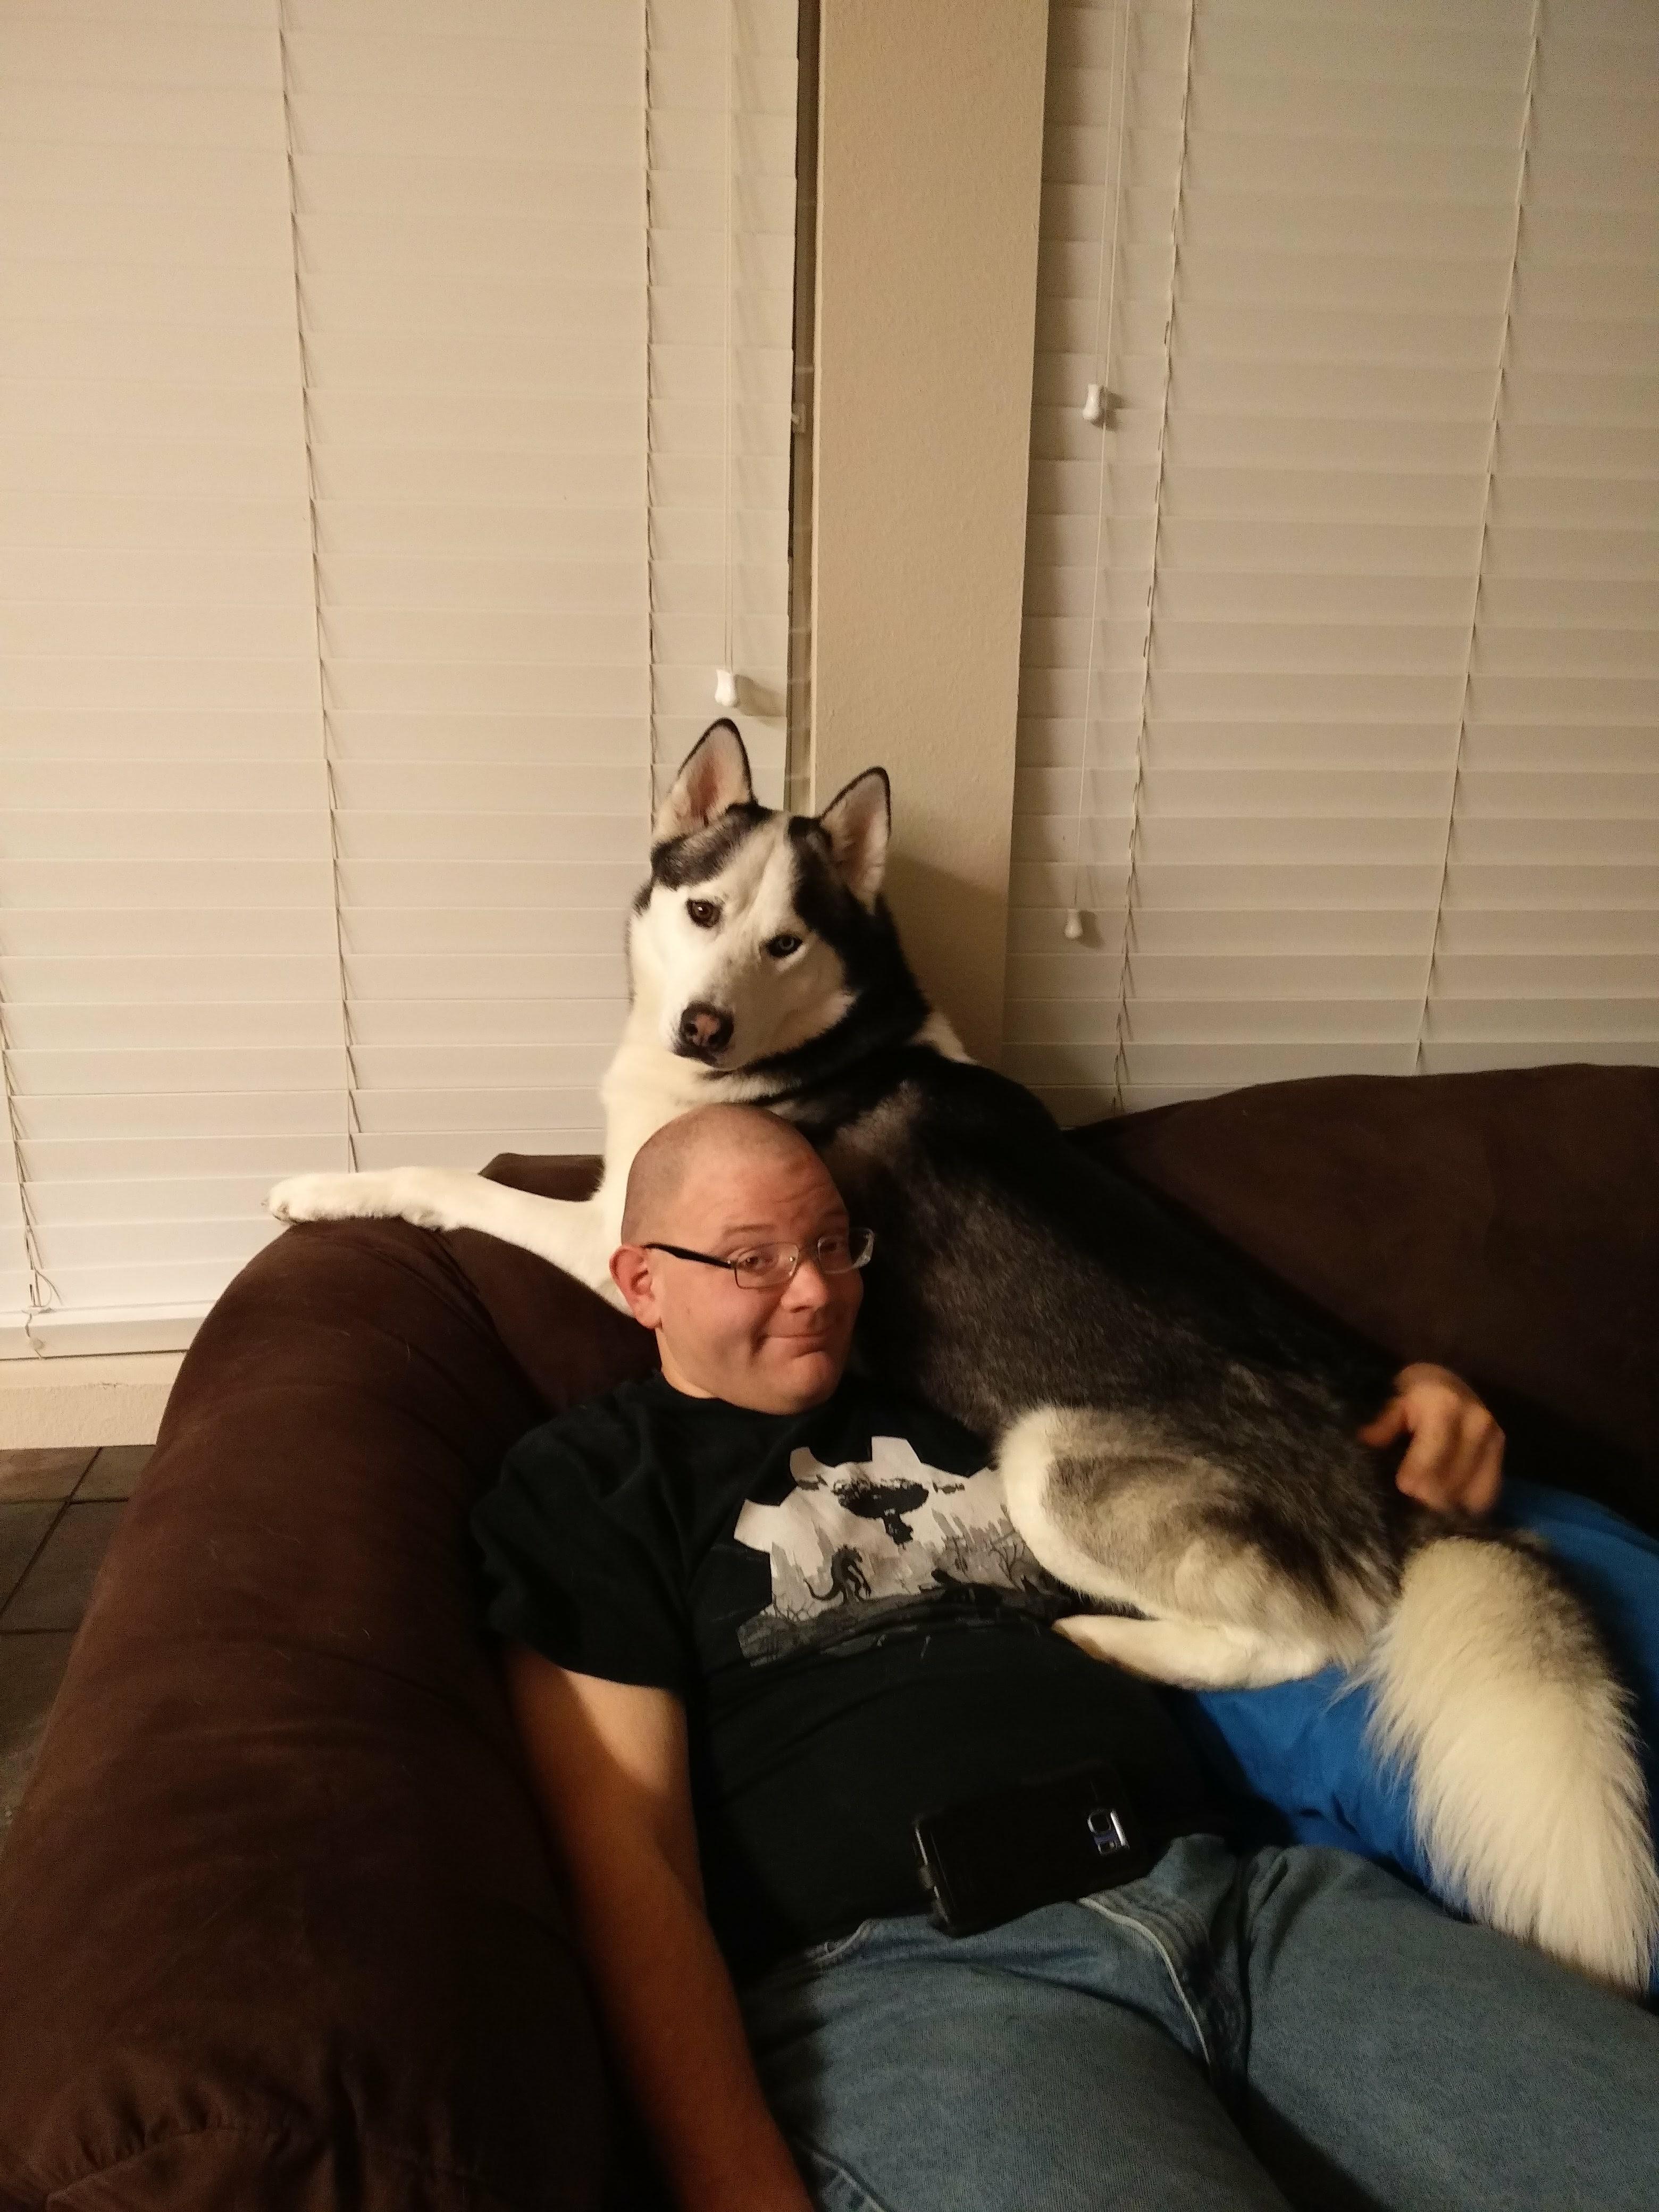 Husky lying on the couch behind a man